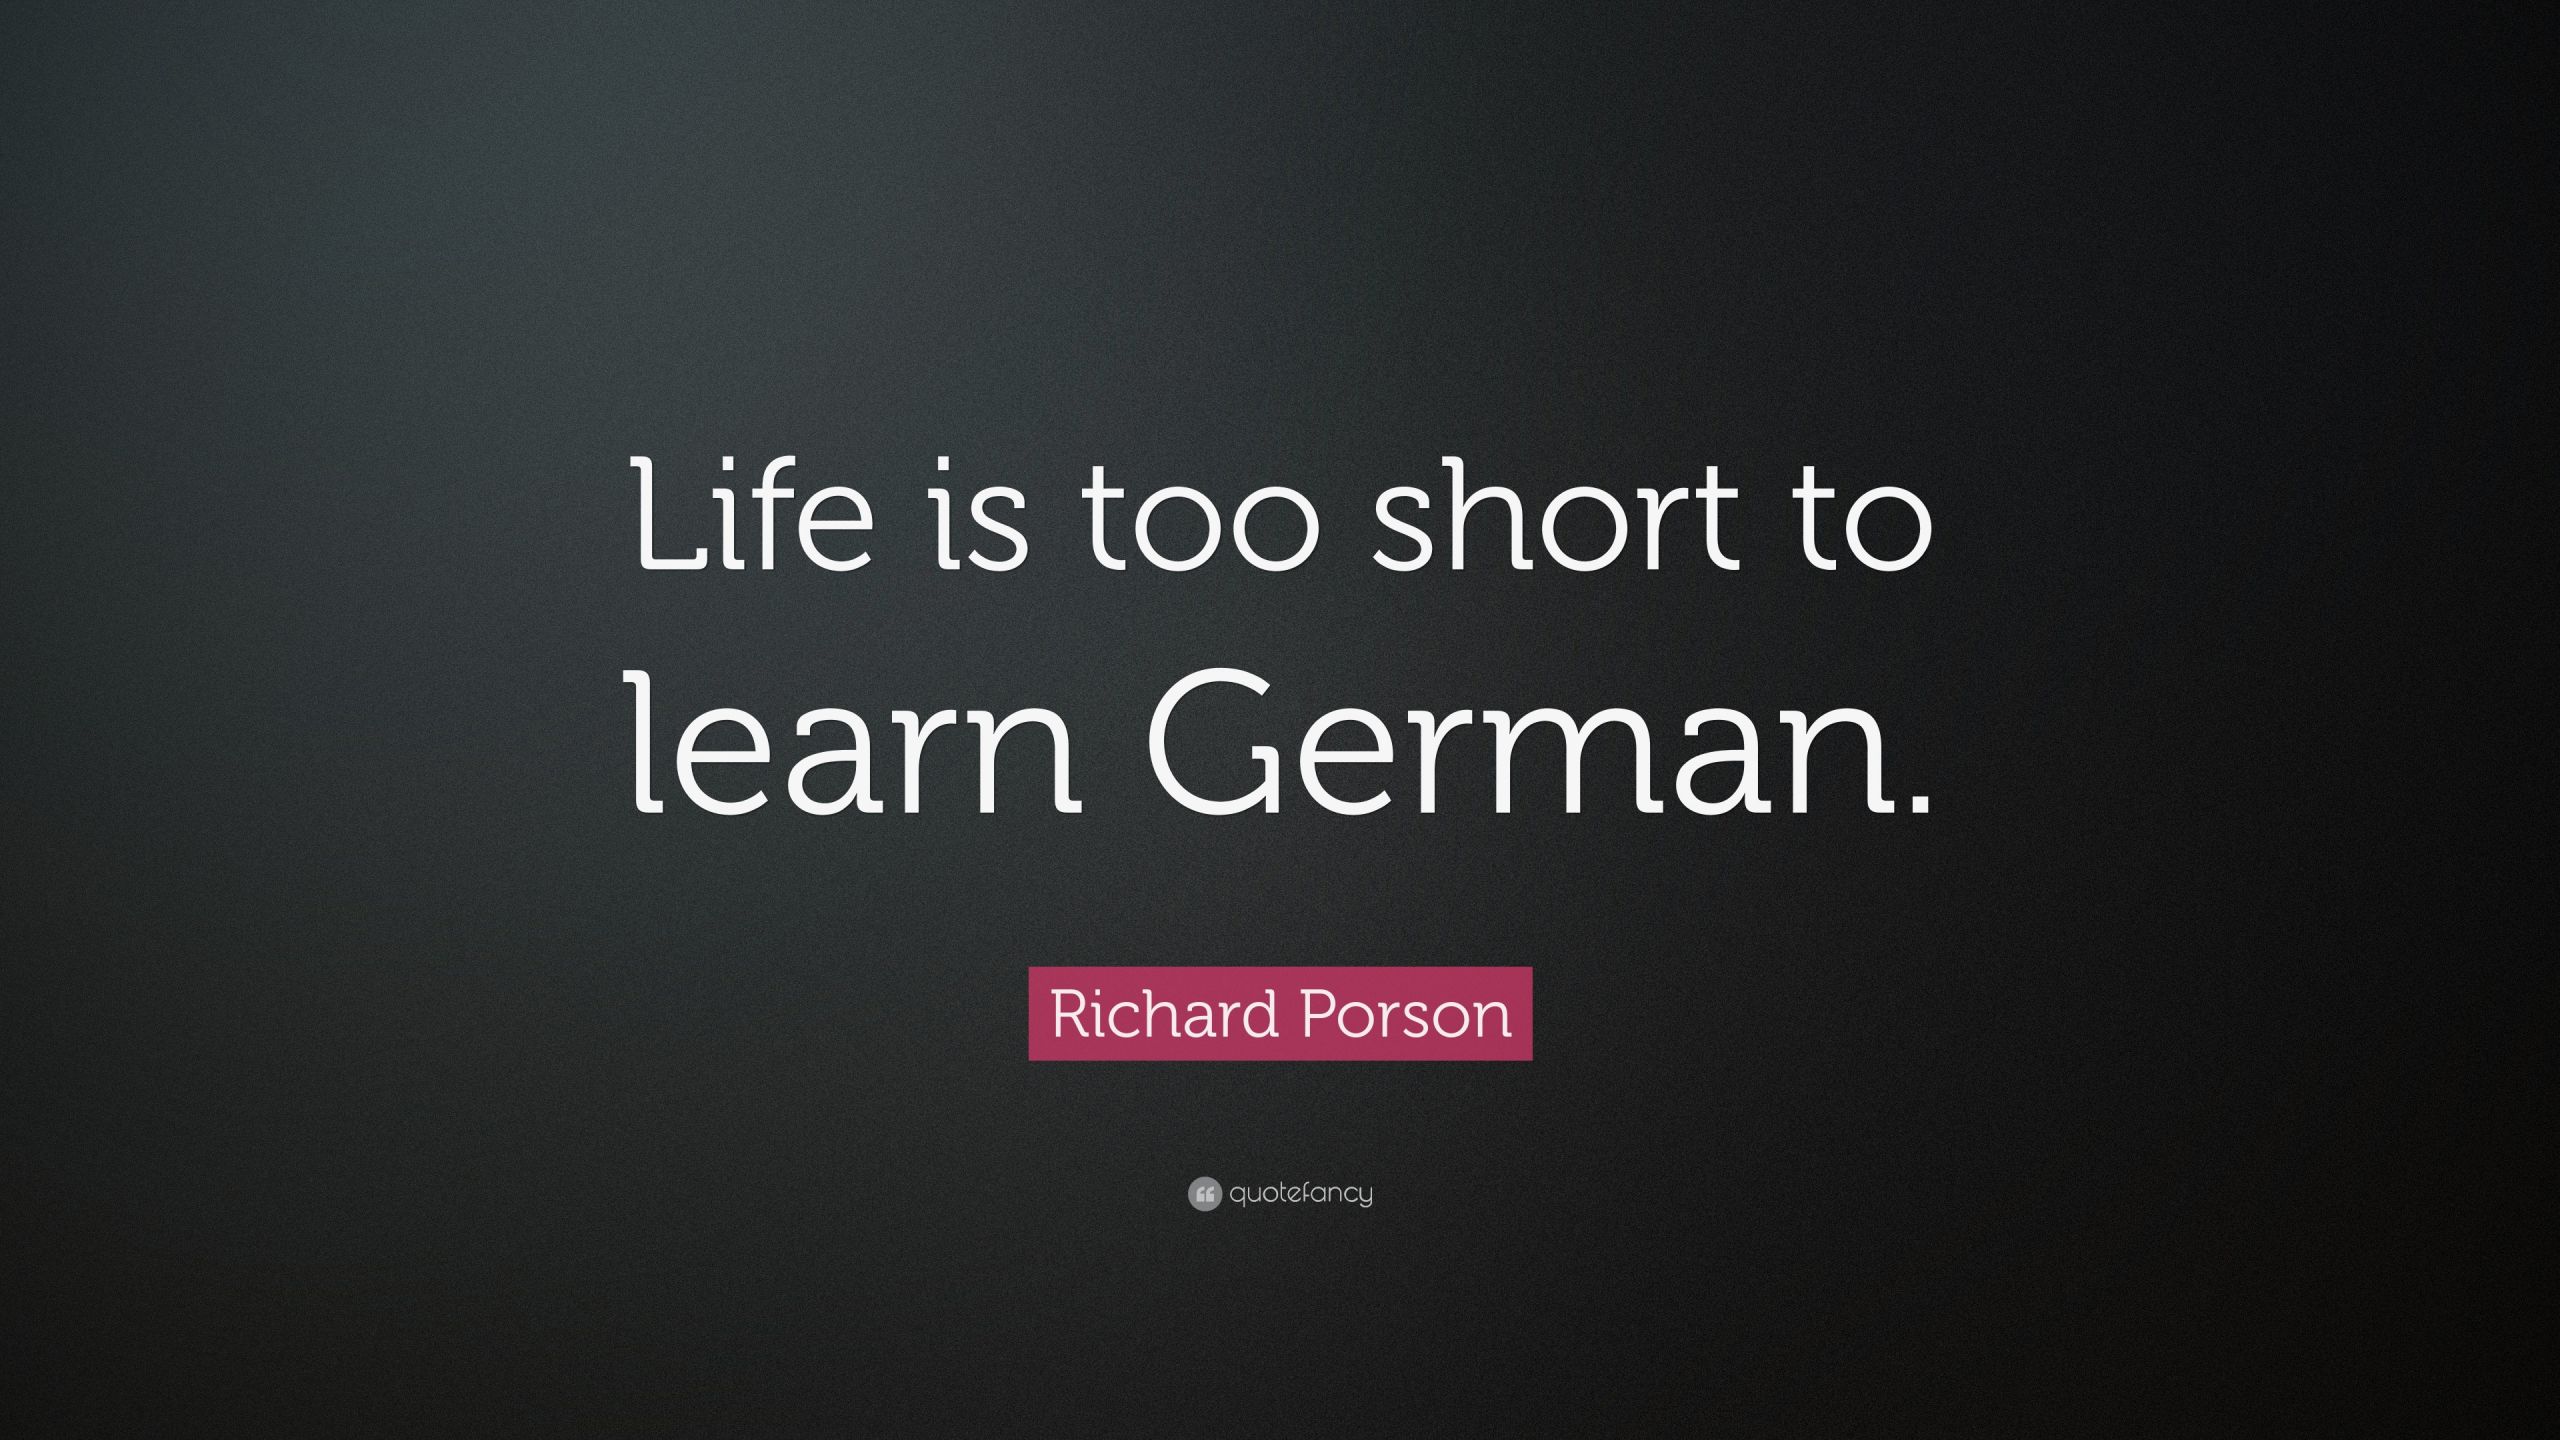 German Quotes About Life
 Richard Porson Quote “Life is too short to learn German